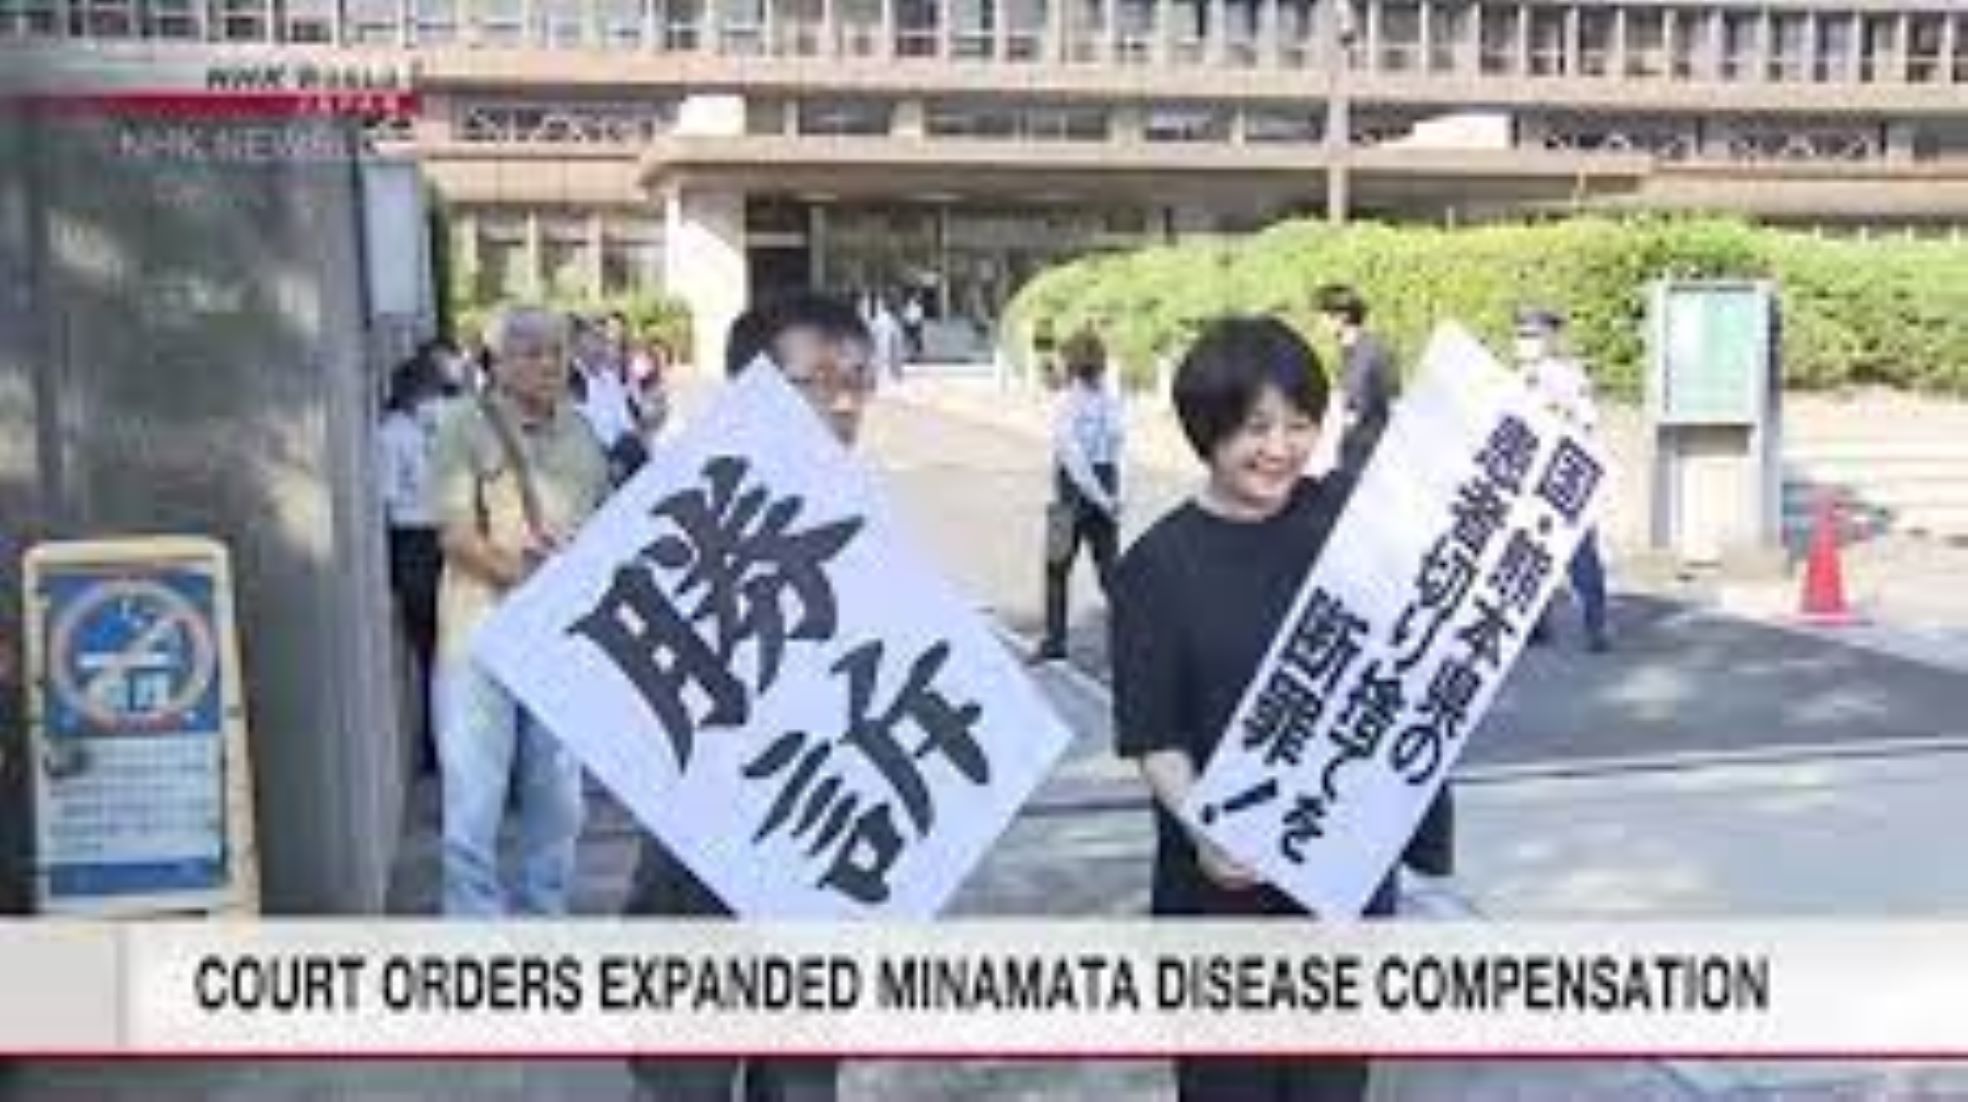 Japanese Court Orders Compensation For Minamata Disease Sufferers